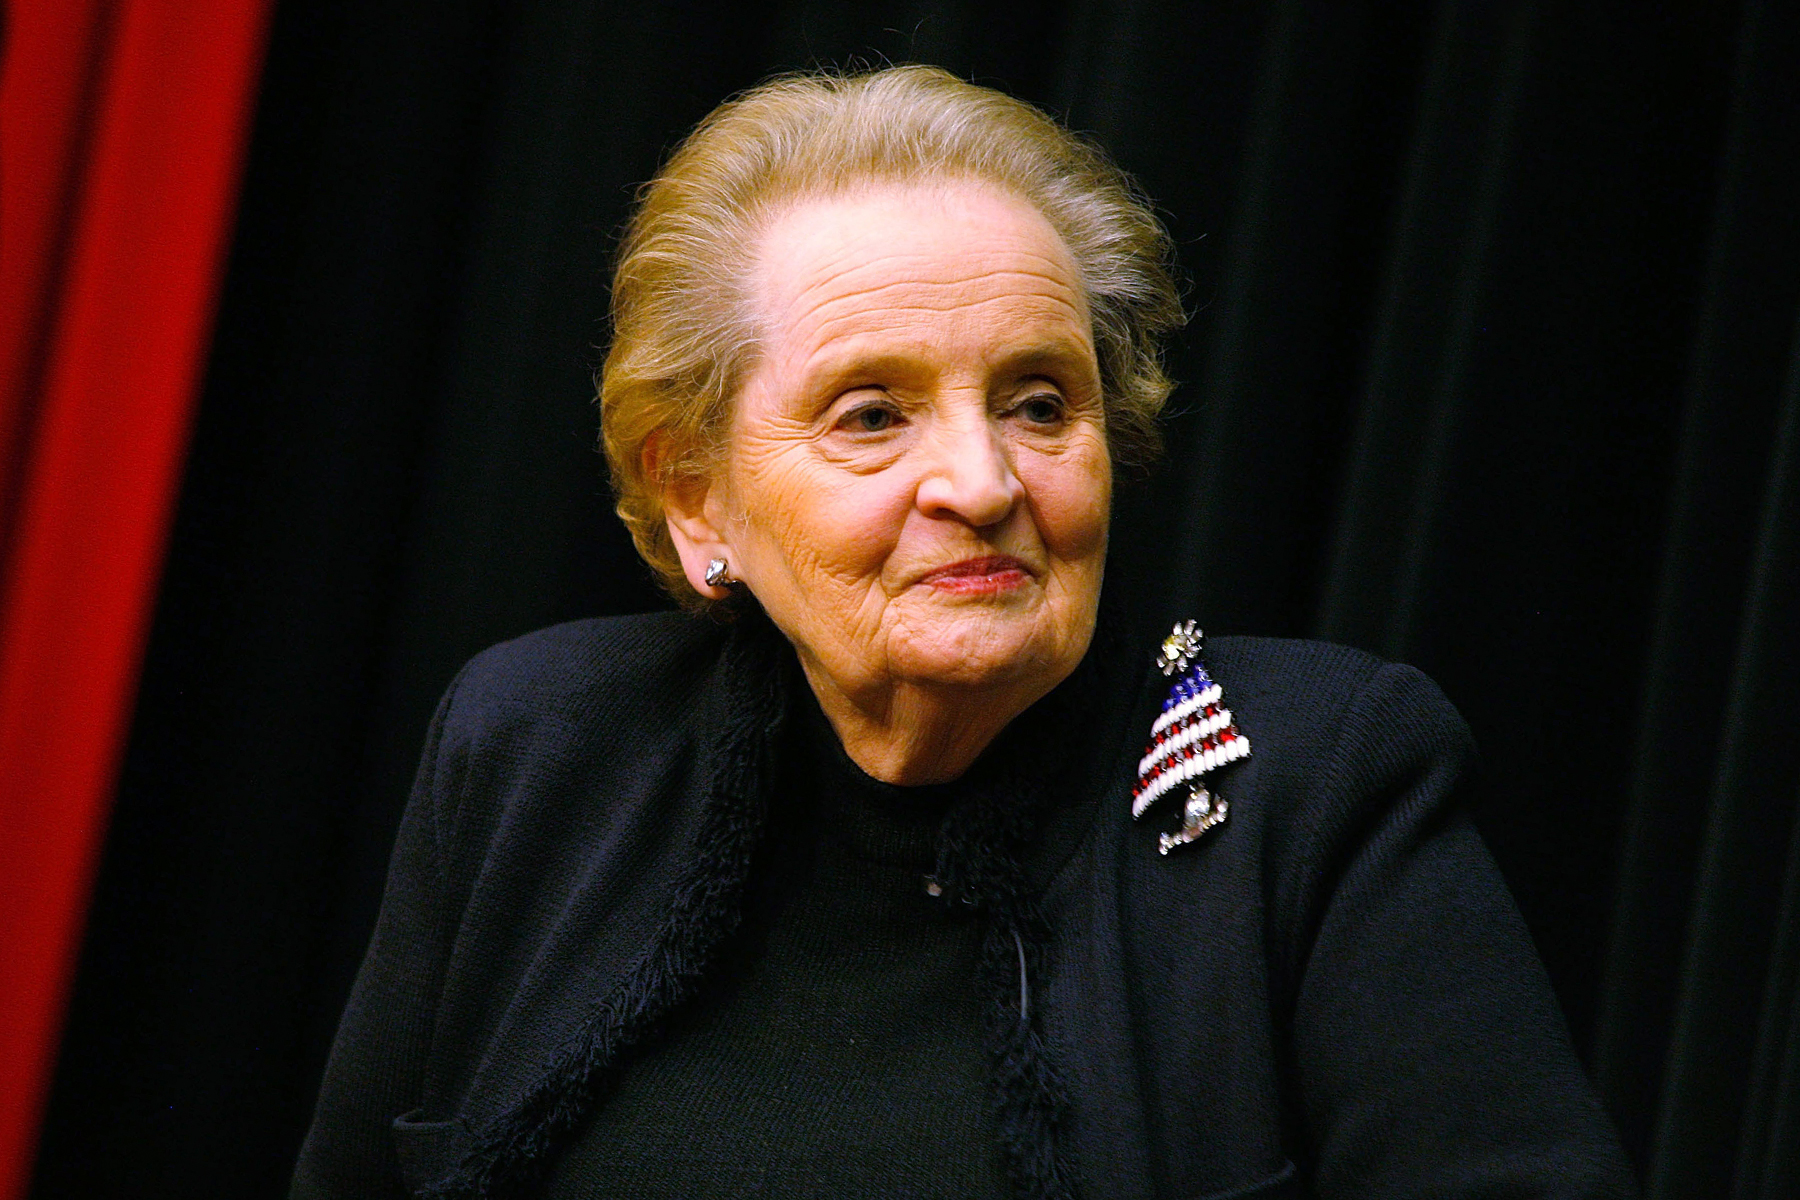 PRESS RELEASE: American Jewish Congress mourns the passing of Secretary Albright